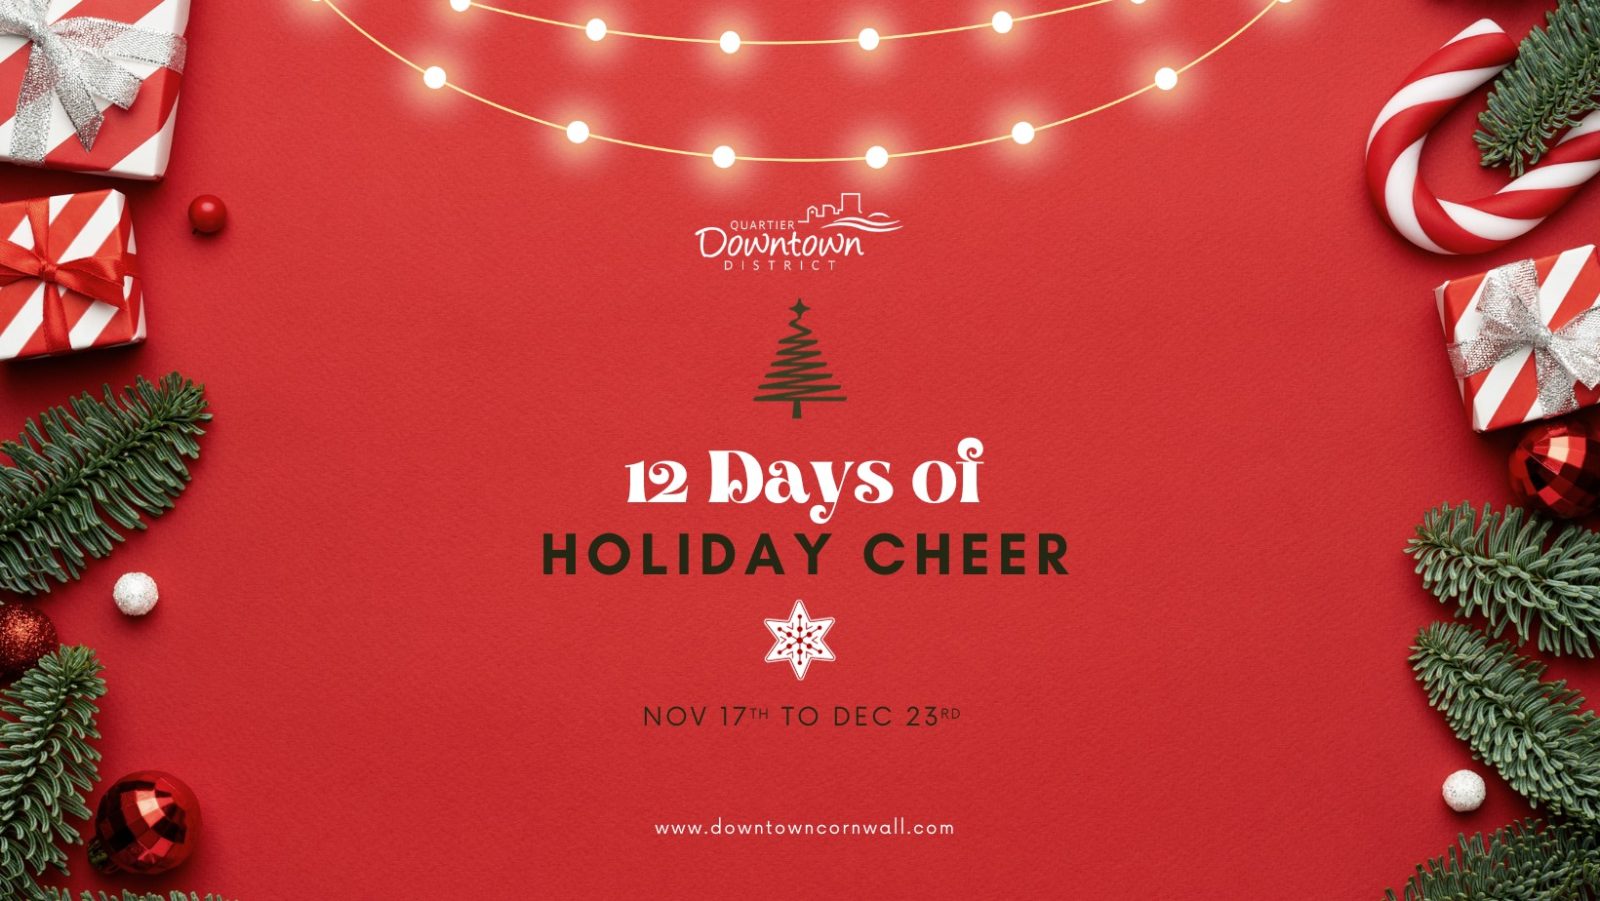 12 Days of Holiday Cheer are coming!